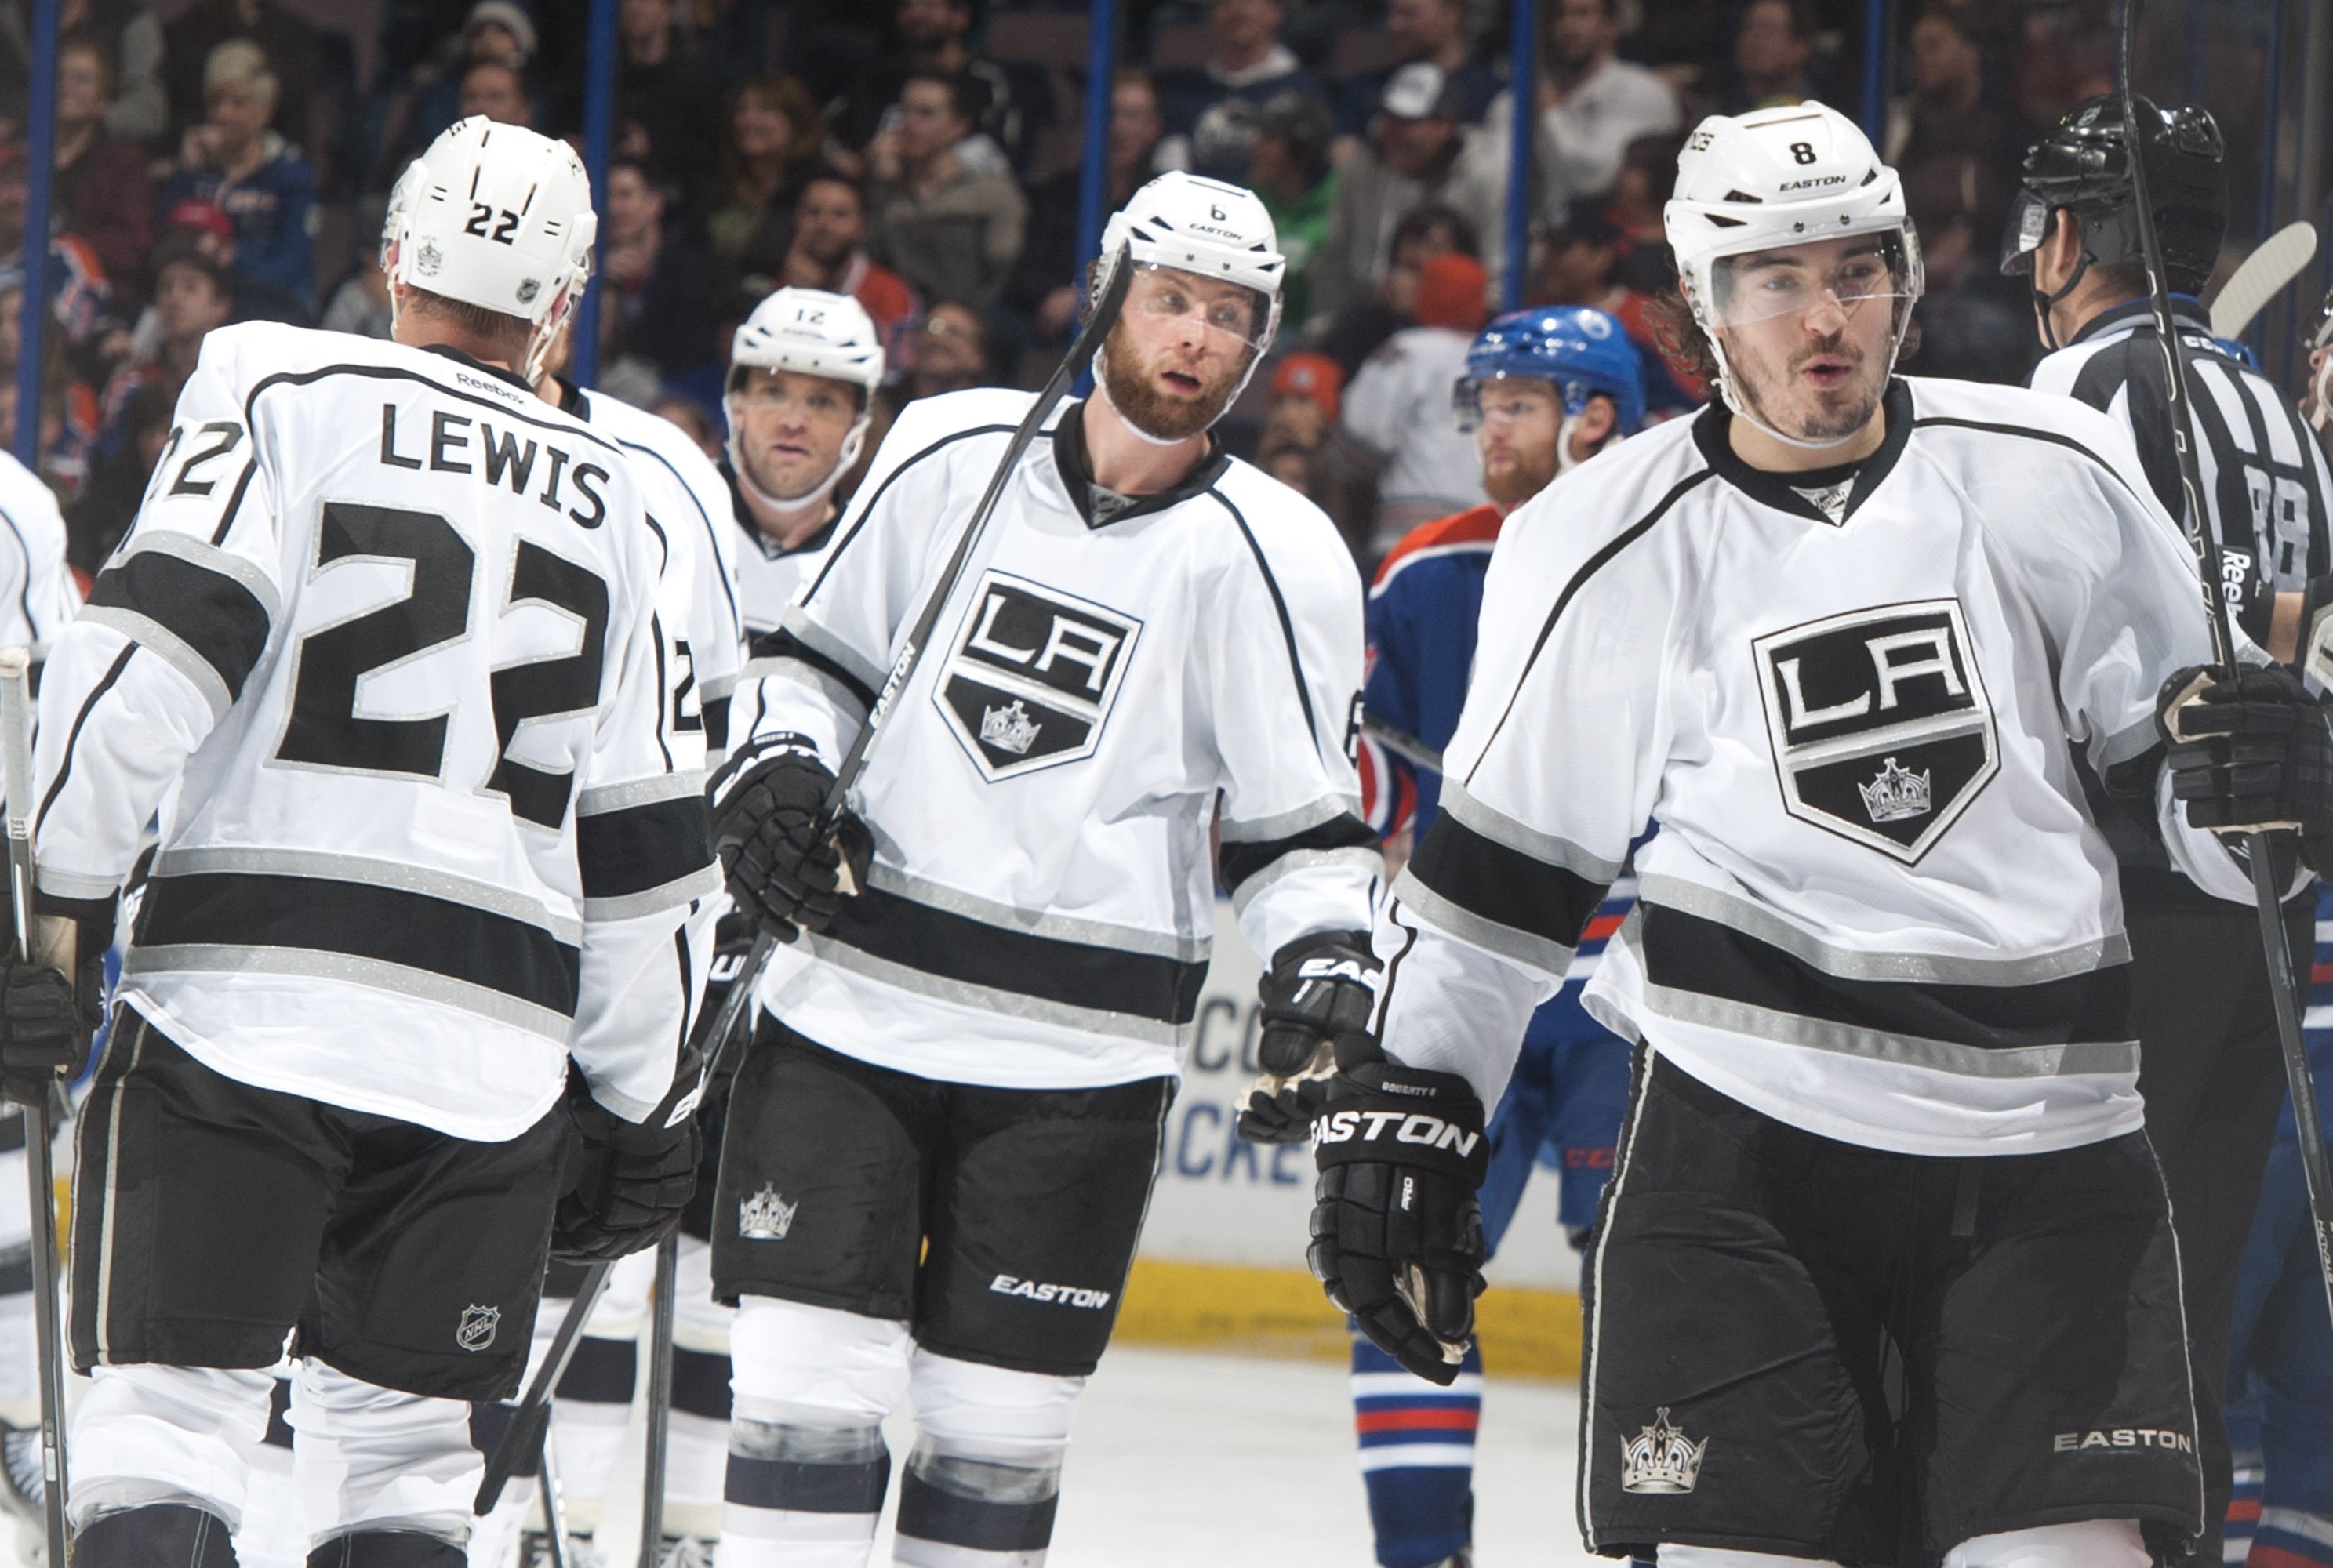 LA Kings Eliminated From Stanley Cup Playoffs After 2-0 Loss to